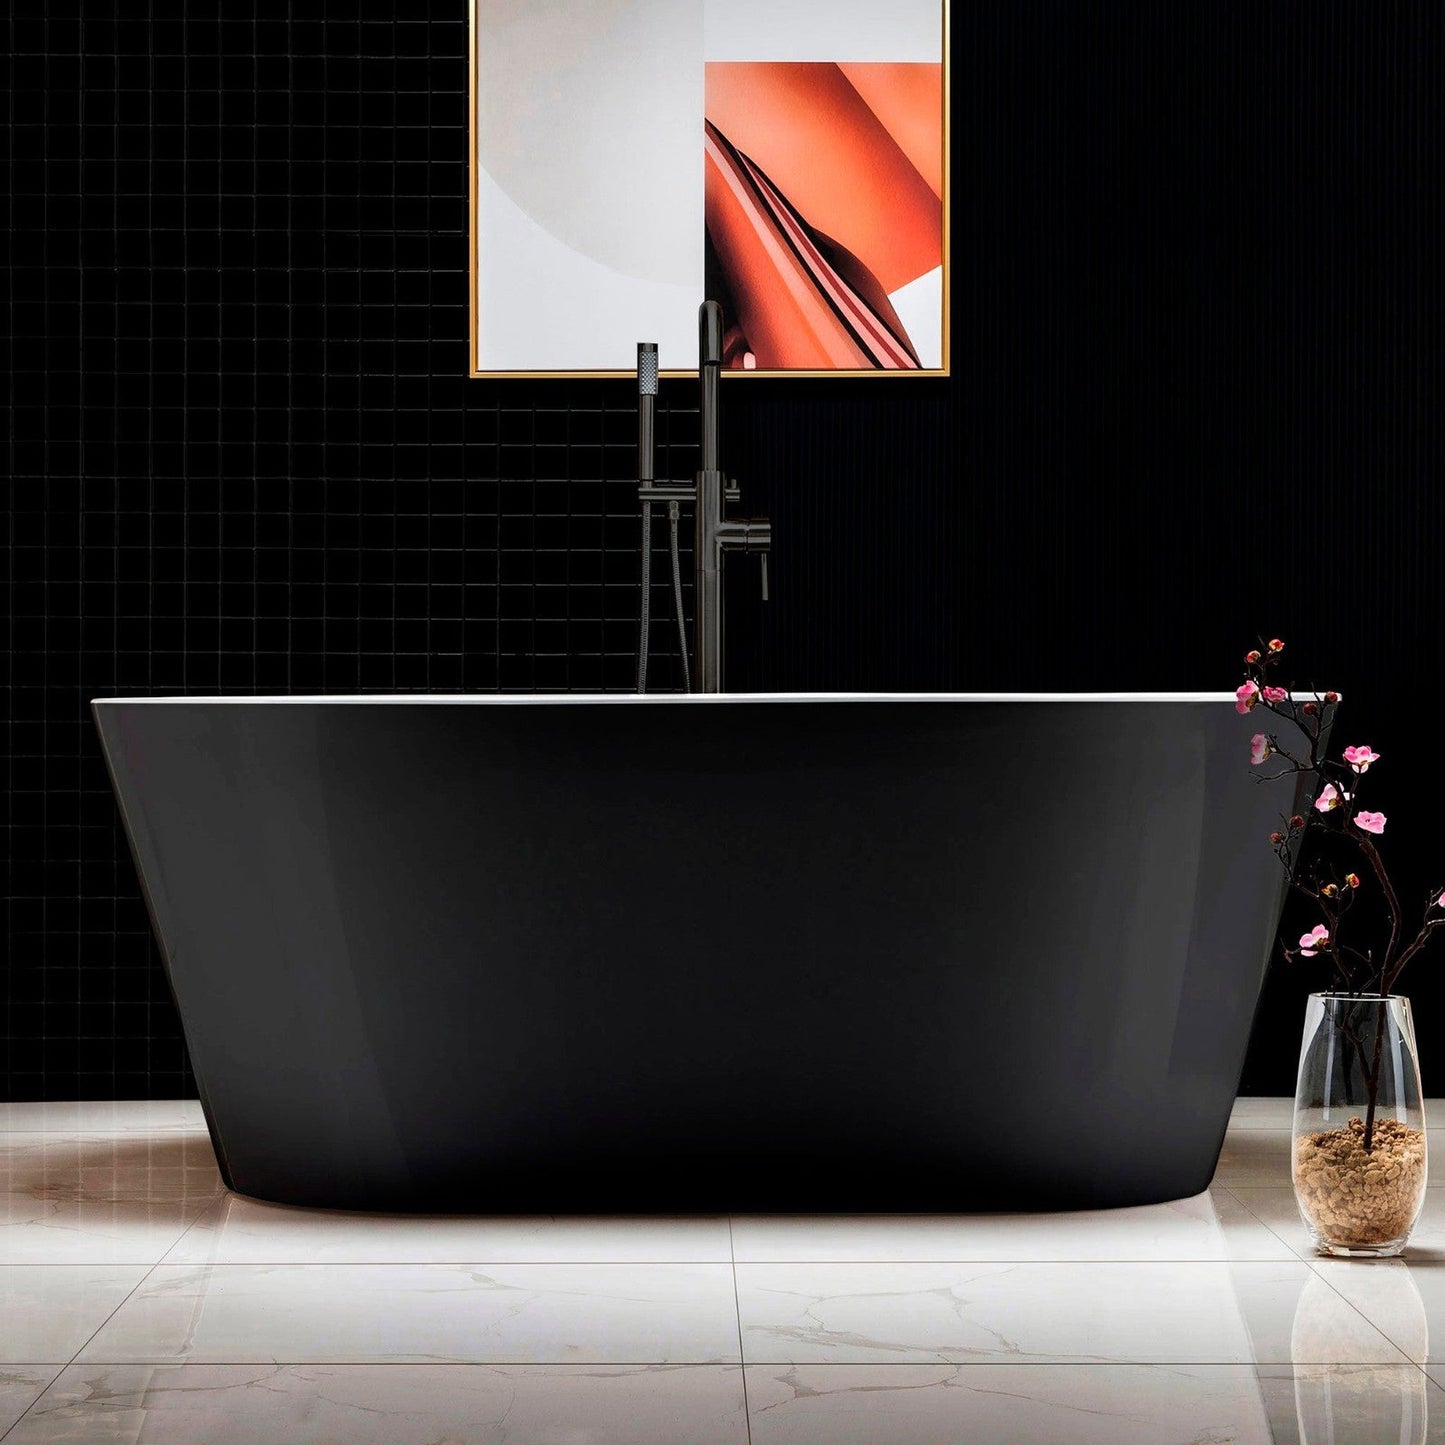 WoodBridge 59" Black Acrylic Freestanding Contemporary Soaking Bathtub With Matte Black Drain, Overflow, F0006MBVT Tub Filler and Caddy Tray